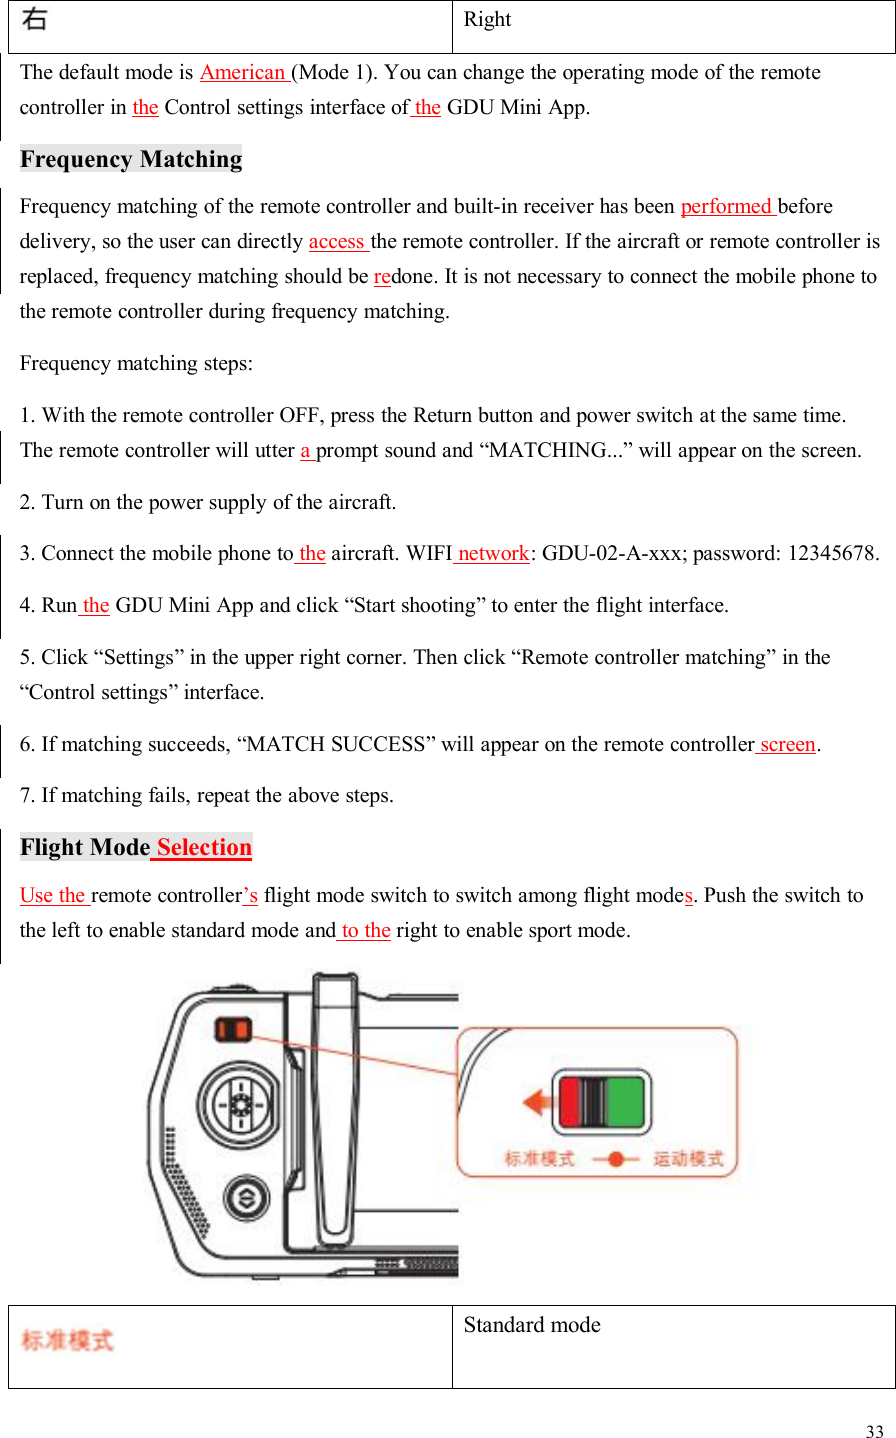 33RightThe default mode is American (Mode 1). You can change the operating mode of the remotecontroller in the Control settings interface of the GDU Mini App.Frequency MatchingFrequency matching of the remote controller and built-in receiver has been performed beforedelivery, so the user can directly access the remote controller. If the aircraft or remote controller isreplaced, frequency matching should be redone. It is not necessary to connect the mobile phone tothe remote controller during frequency matching.Frequency matching steps:1. With the remote controller OFF, press the Return button and power switch at the same time.The remote controller will utter aprompt sound and “MATCHING...” will appear on the screen.2. Turn on the power supply of the aircraft.3. Connect the mobile phone to the aircraft. WIFI network: GDU-02-A-xxx; password: 12345678.4. Run the GDU Mini App and click “Start shooting” to enter the flight interface.5. Click “Settings” in the upper right corner. Then click “Remote controller matching” in the“Control settings” interface.6. If matching succeeds, “MATCH SUCCESS” will appear on the remote controller screen.7. If matching fails, repeat the above steps.Flight Mode SelectionUse the remote controller’s flight mode switch to switch among flight modes. Push the switch tothe left to enable standard mode and to the right to enable sport mode.Standard mode